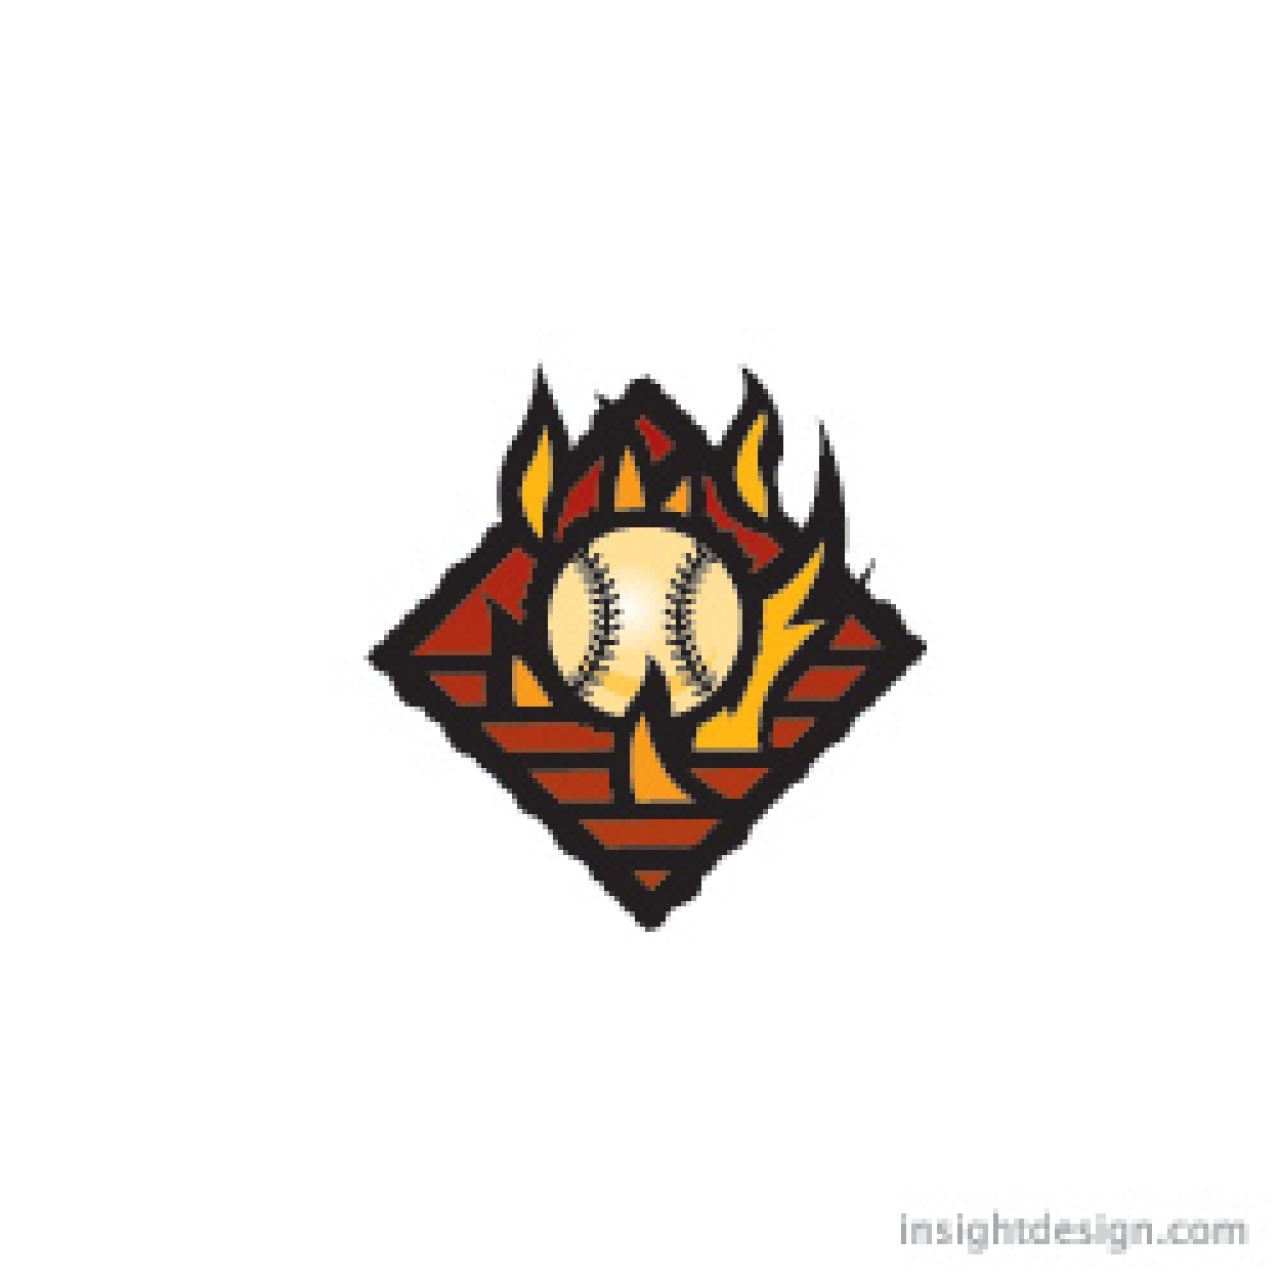 Nolan Ryan Center of the Plate brand logo shows a plate that looks like a grill top with flames. A baseball sets at the center of the plate.